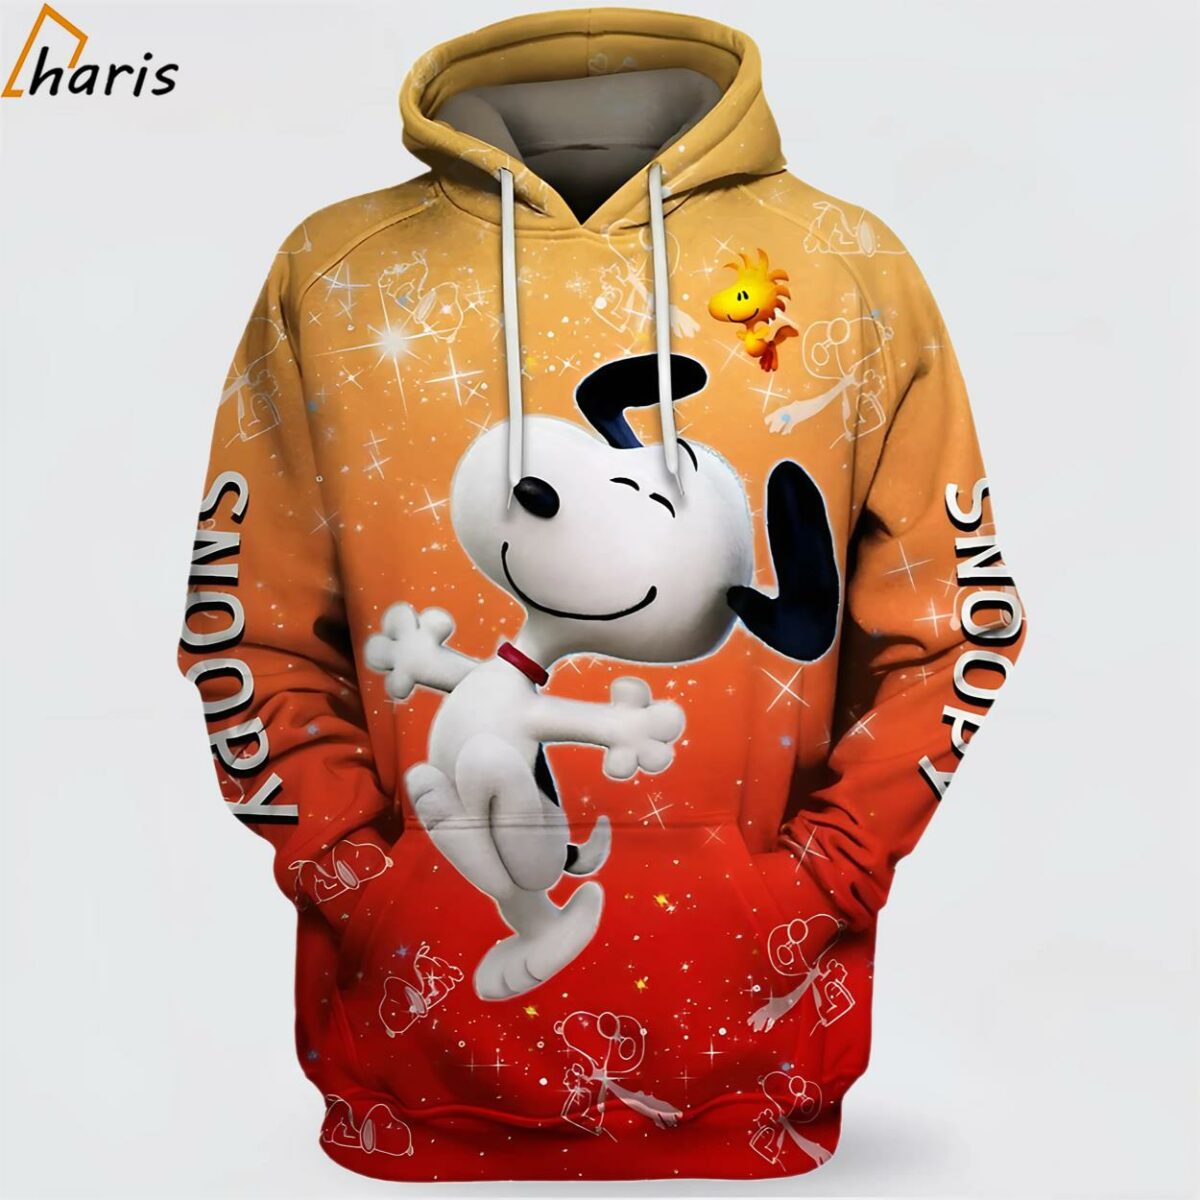 Colorful Snoopy 3D Hoodie 1 jersey